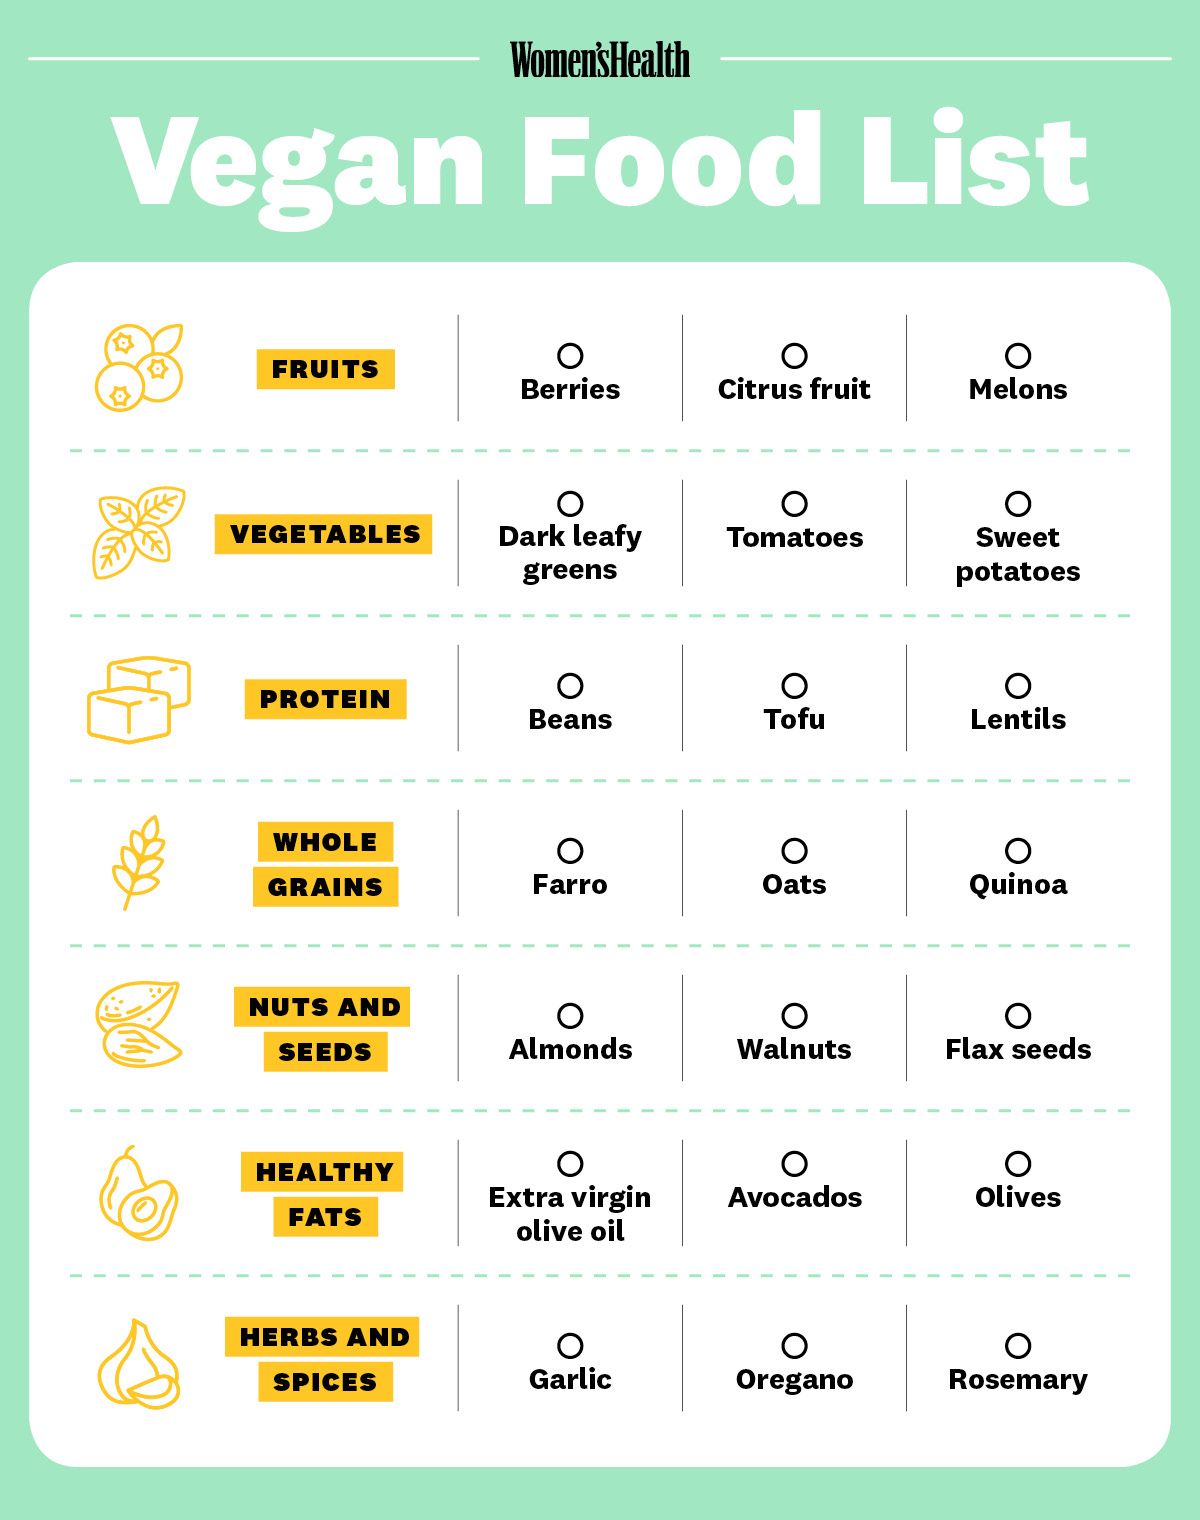 Plant-Based Food List: How to Start a Plant-Based Diet